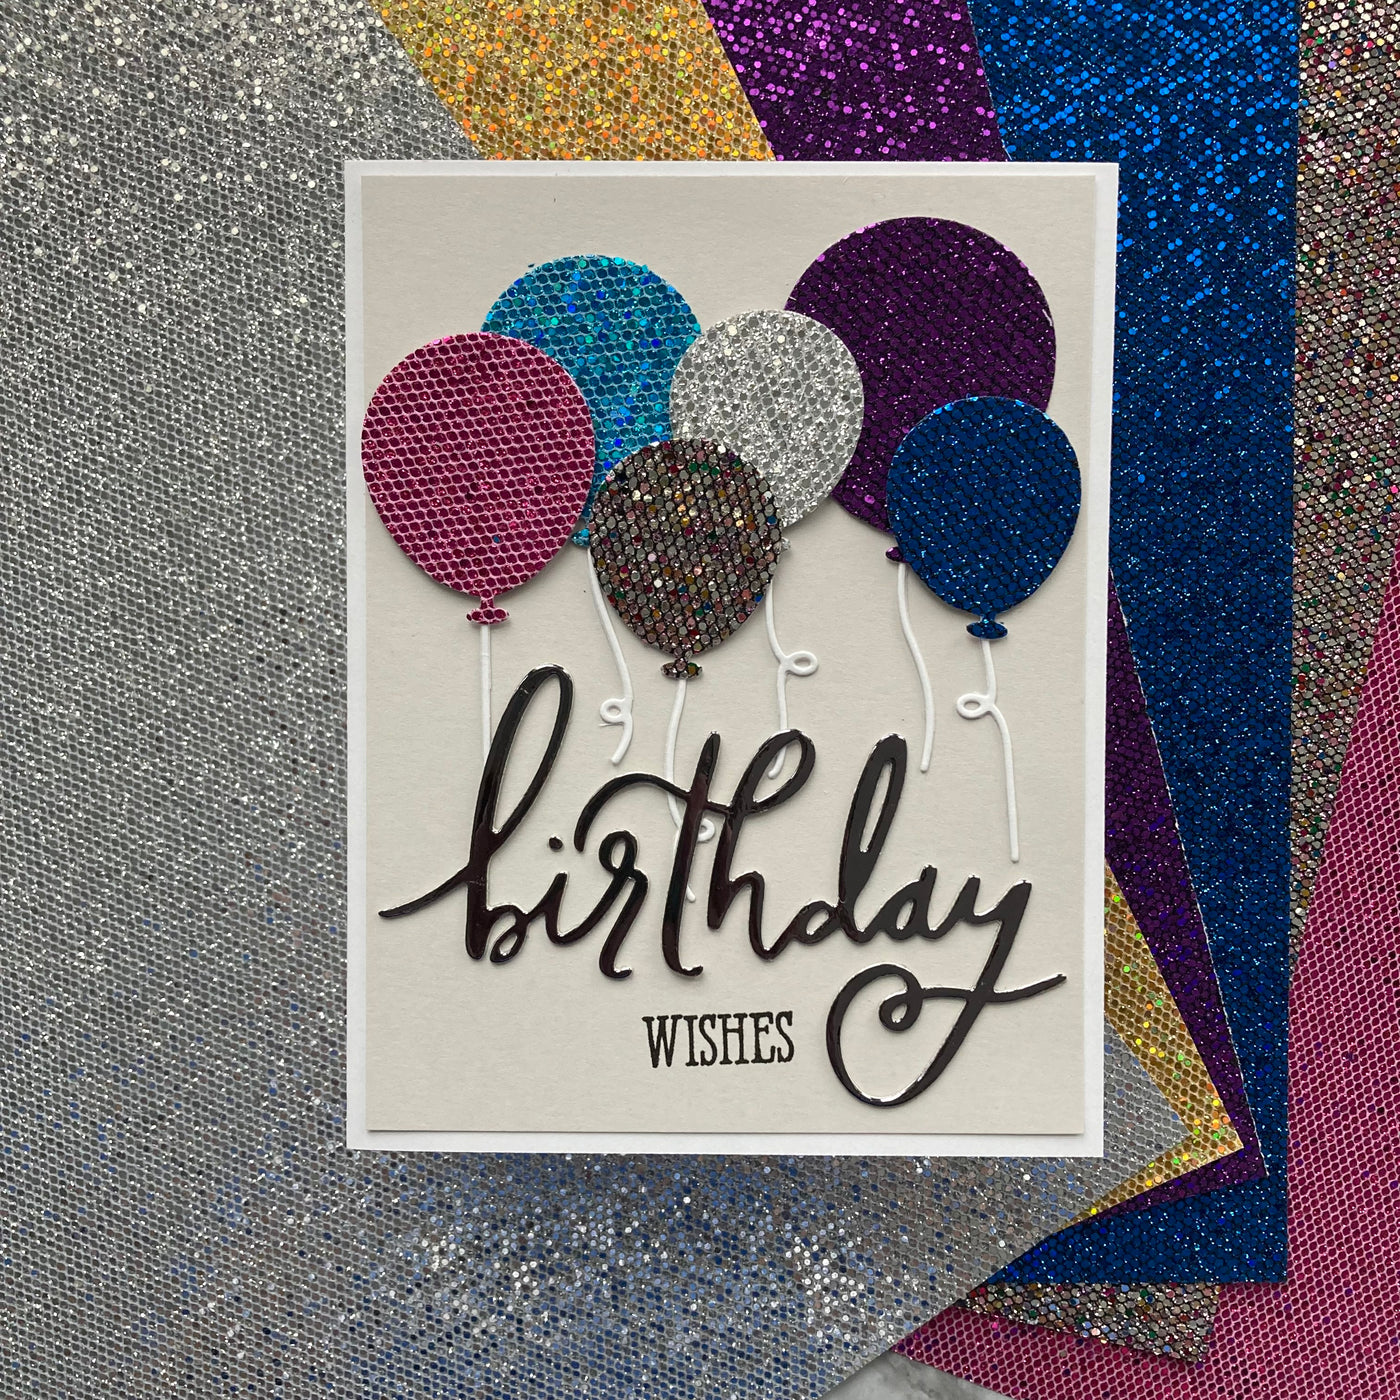 12x12 Glitter Cardstock- Cotton Candy